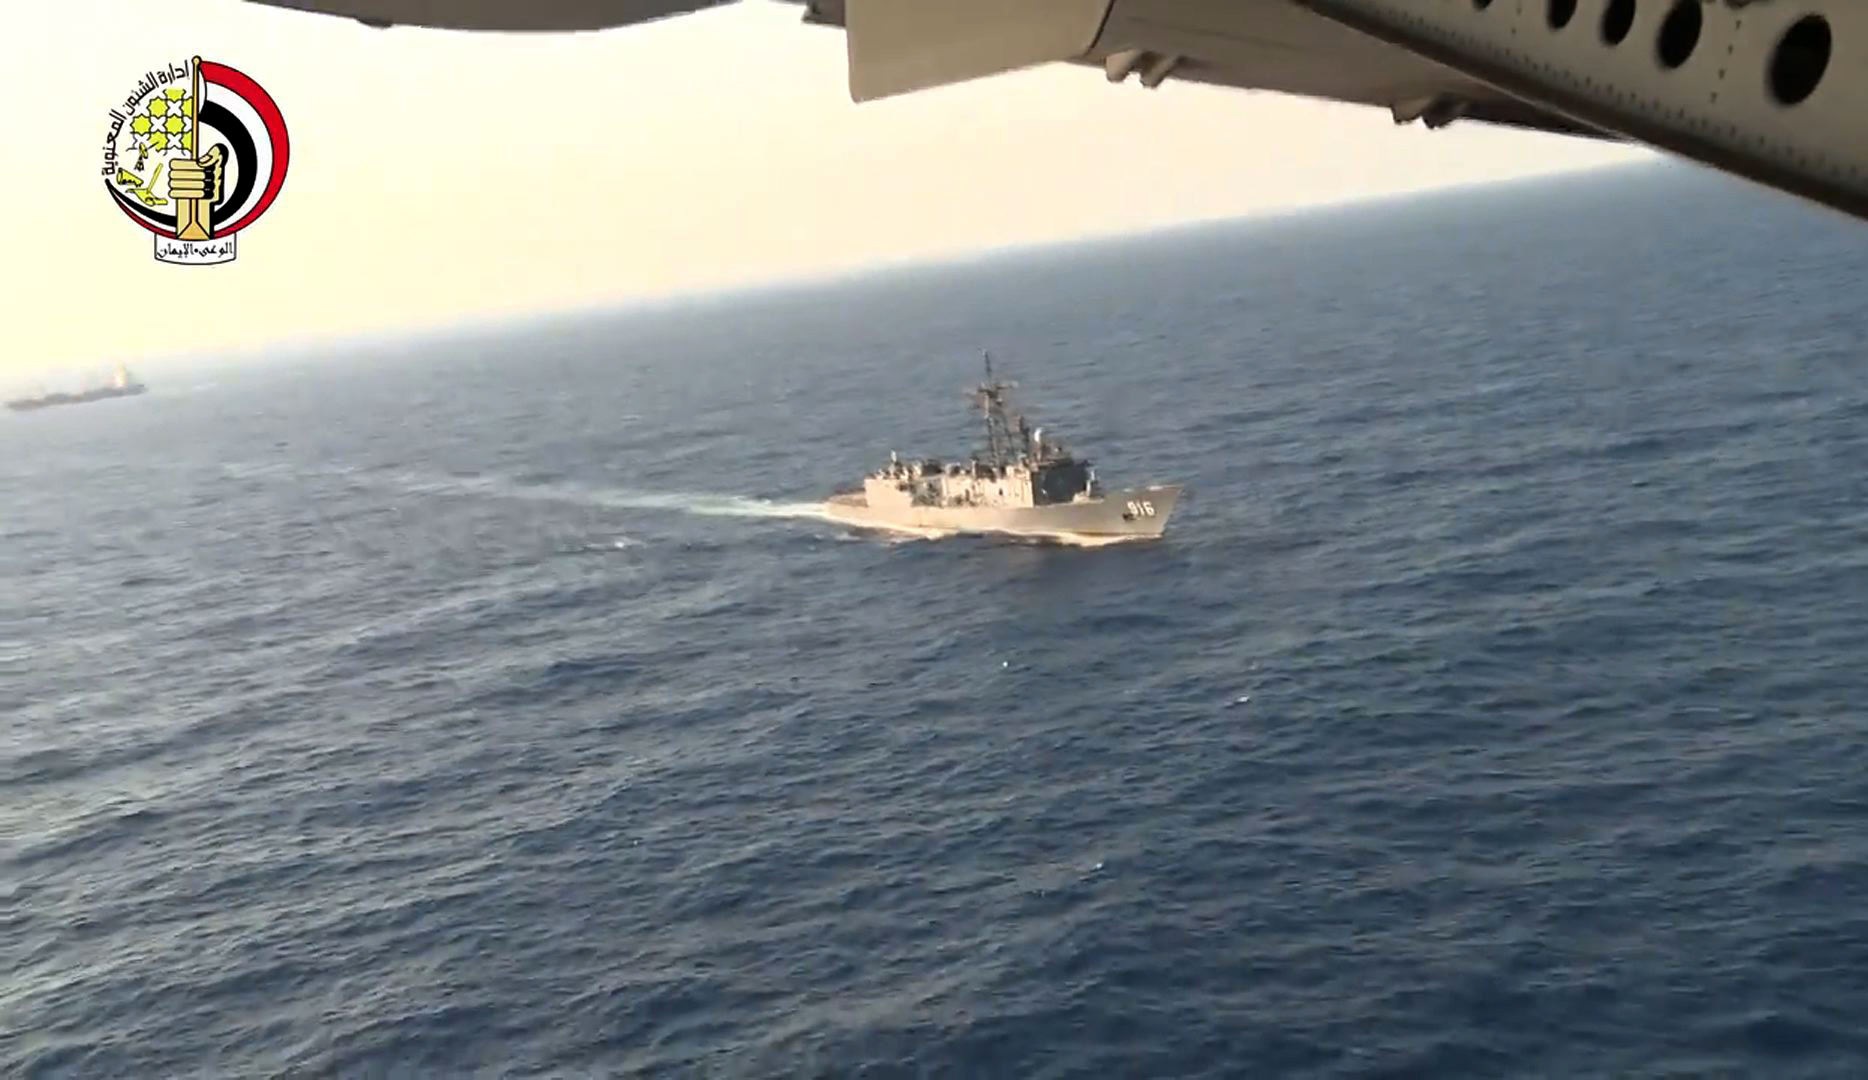 An image grab taken from a handout video released by the Egyptian Defence Ministry on May 20, 2016 shows the Egyptian military taking part in a search mission in the Mediterranean Sea for the remains of an EgyptAir plane which crashed on May 19, 2016 with 66 people on board, as mystery surrounded its fate despite suspicions of terrorism.   / AFP PHOTO / EGYPTIAN DEFENCE MINISTRY AND AFP PHOTO / HO / RESTRICTED TO EDITORIAL USE - MANDATORY CREDIT "AFP PHOTO / EGYPTIAN DEFENCE MINISTRY" - NO MARKETING NO ADVERTISING CAMPAIGNS - DISTRIBUTED AS A SERVICE TO CLIENTS